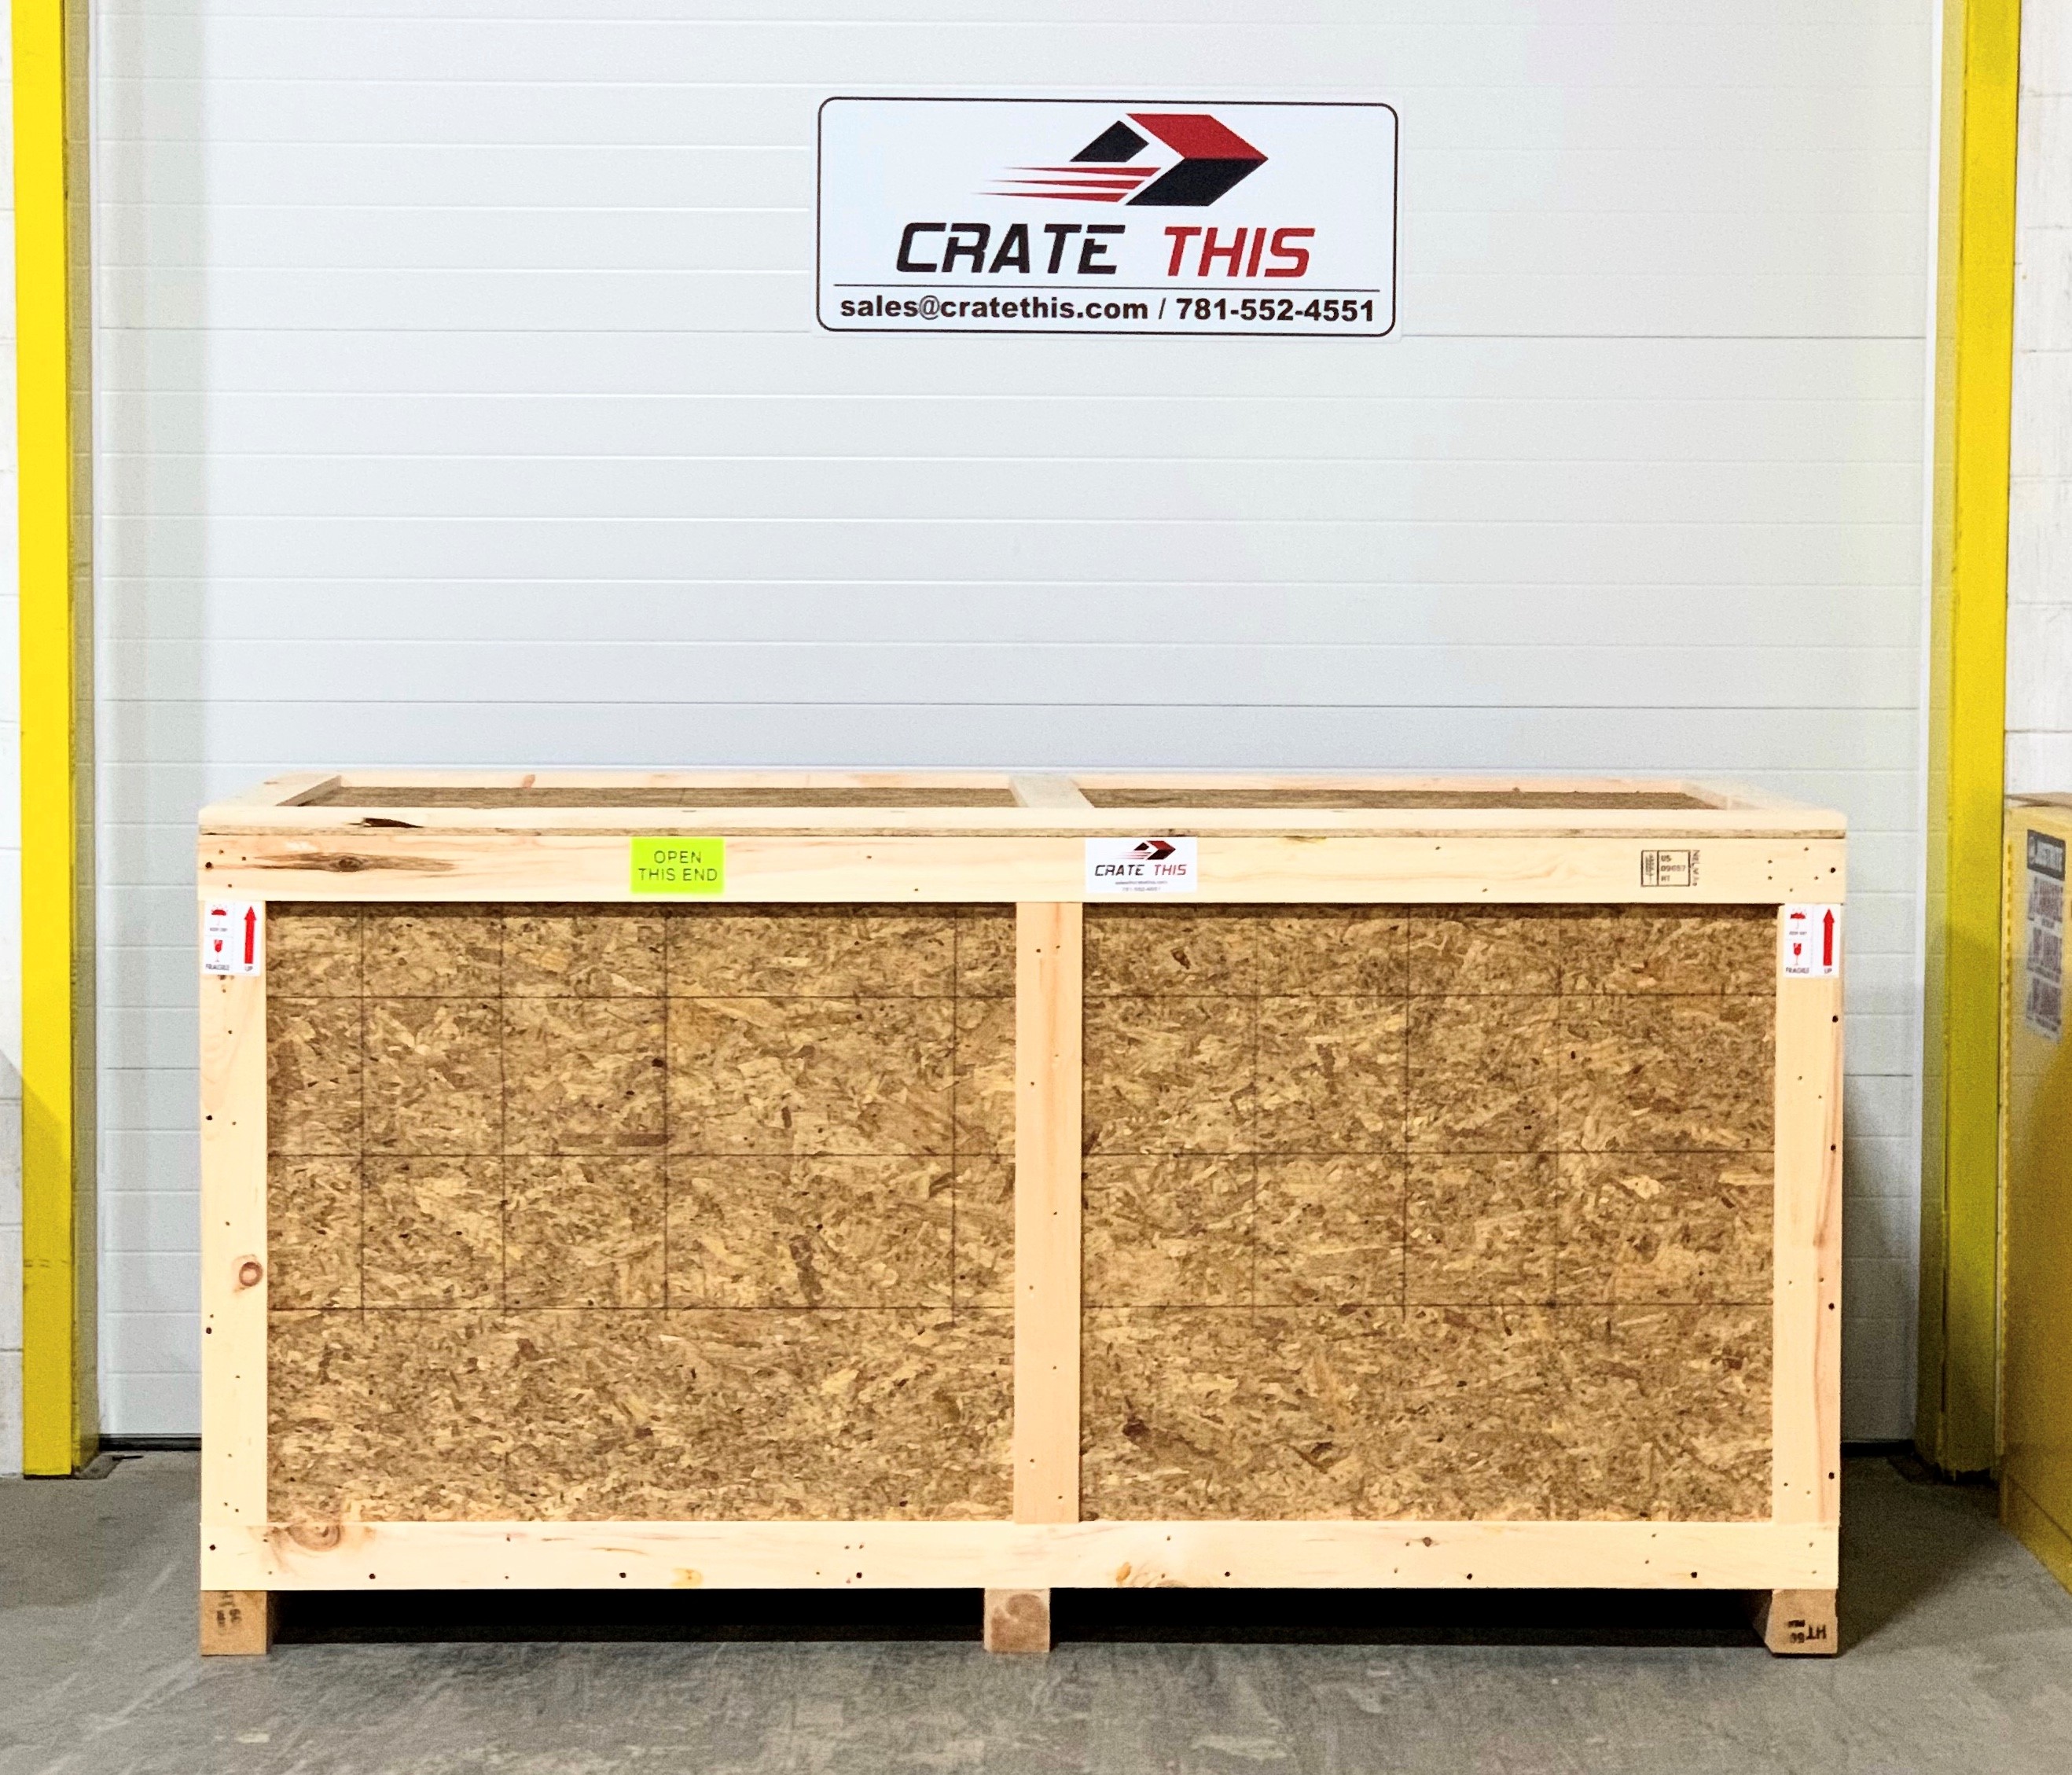 24/7 Custom Crating & Packaging Service | Crate This